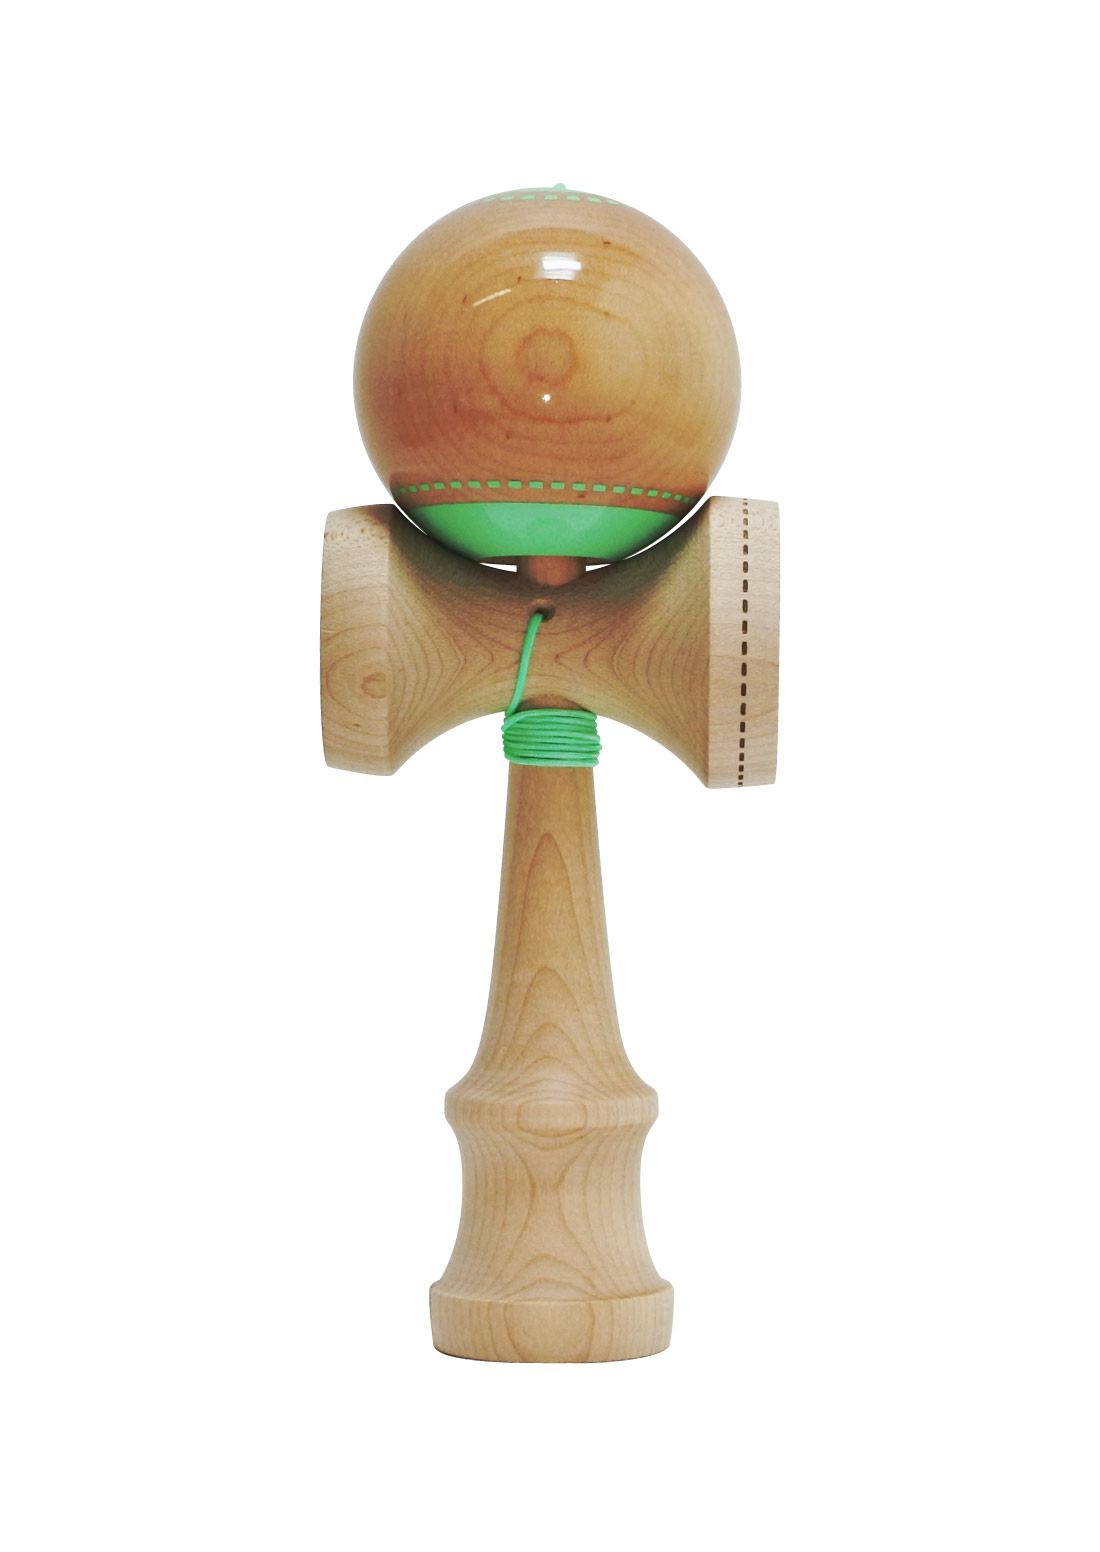 kendama_grain_theory_stitch_vintage_teal_face